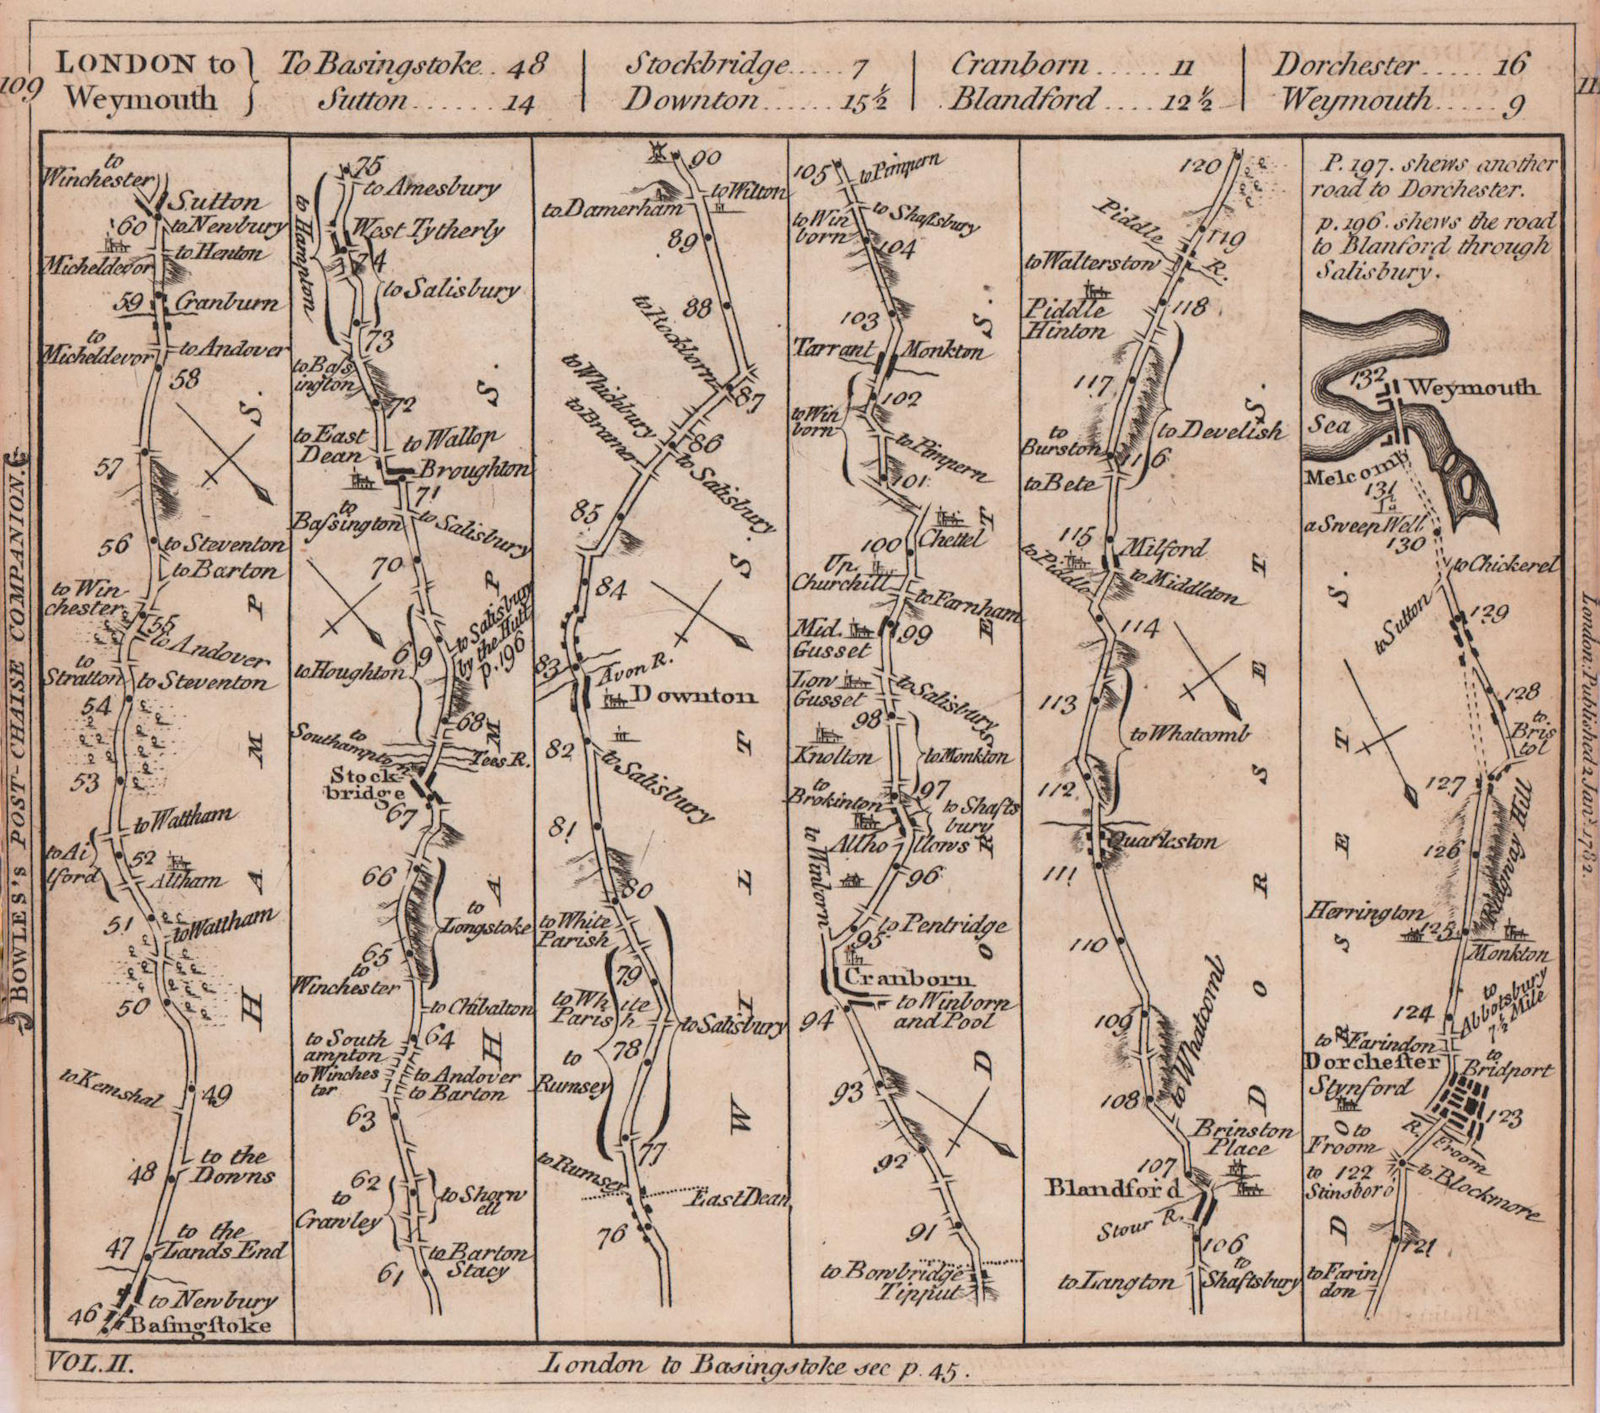 Associate Product Basingstoke-Cranborne-Dorchester-Weymouth road strip map. BOWLES 1782 old